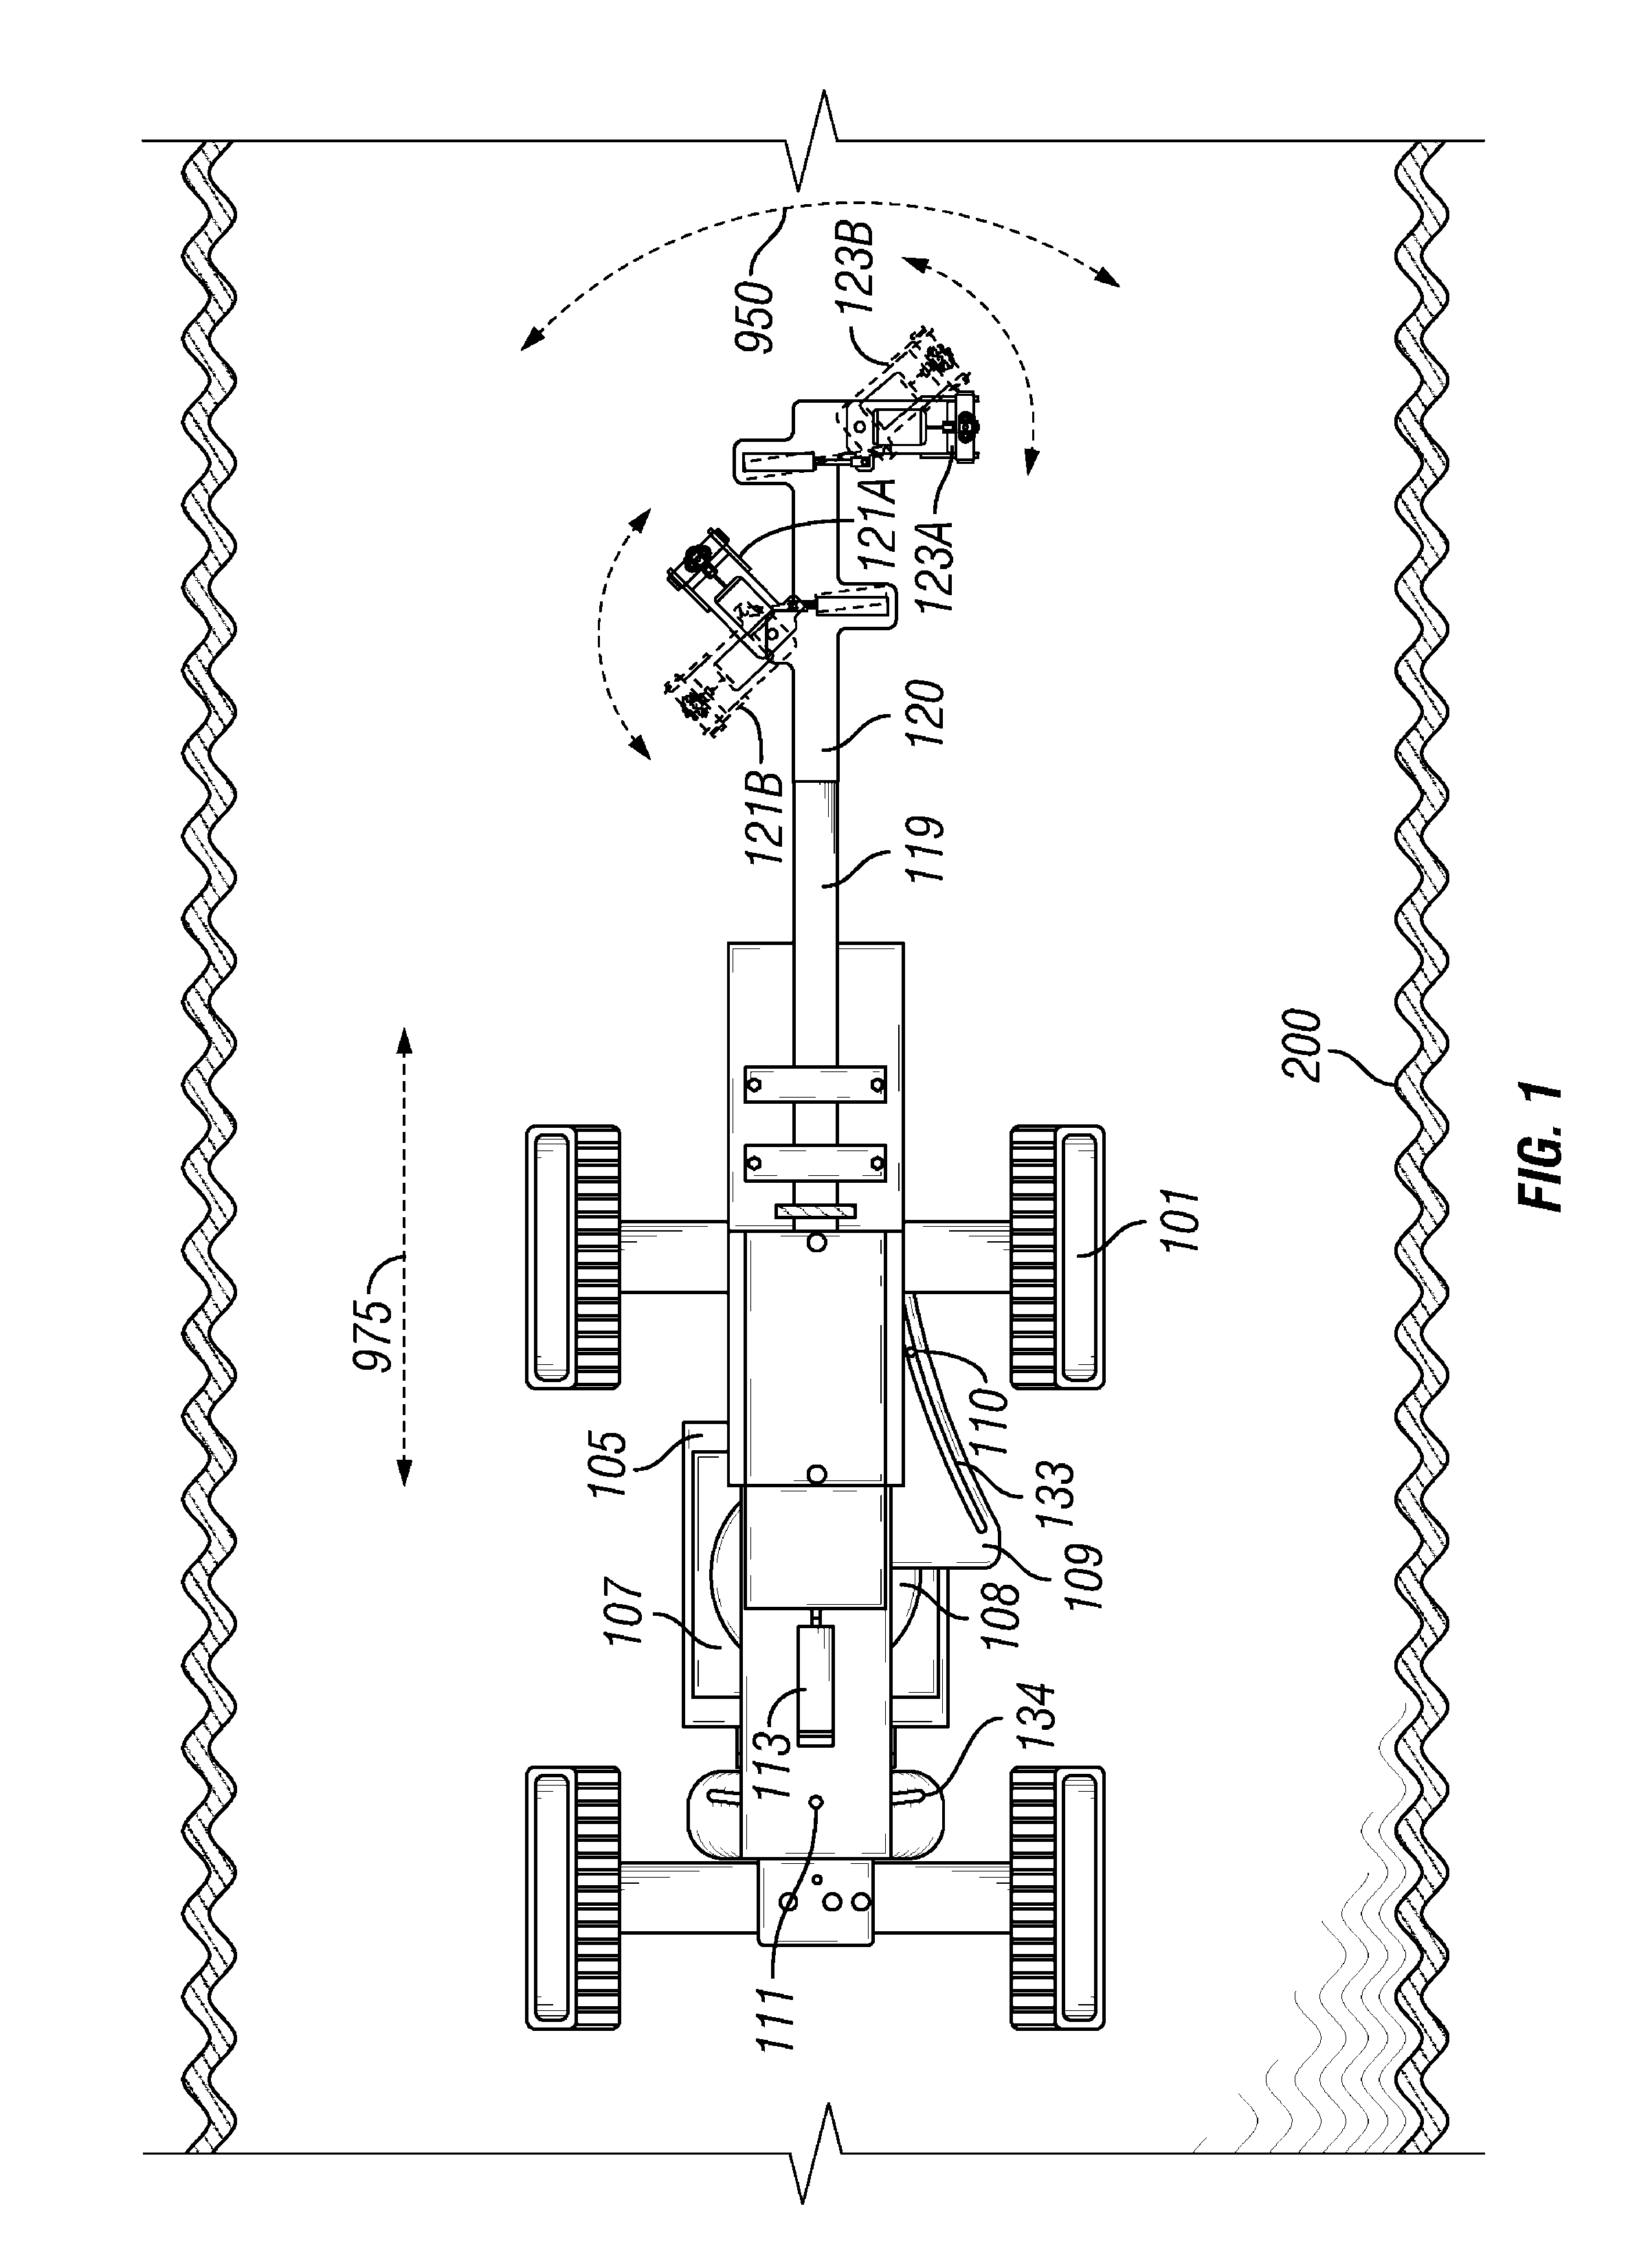 Apparatus and method for lining large diameter pipes with an environmentally compatible impervious membrane